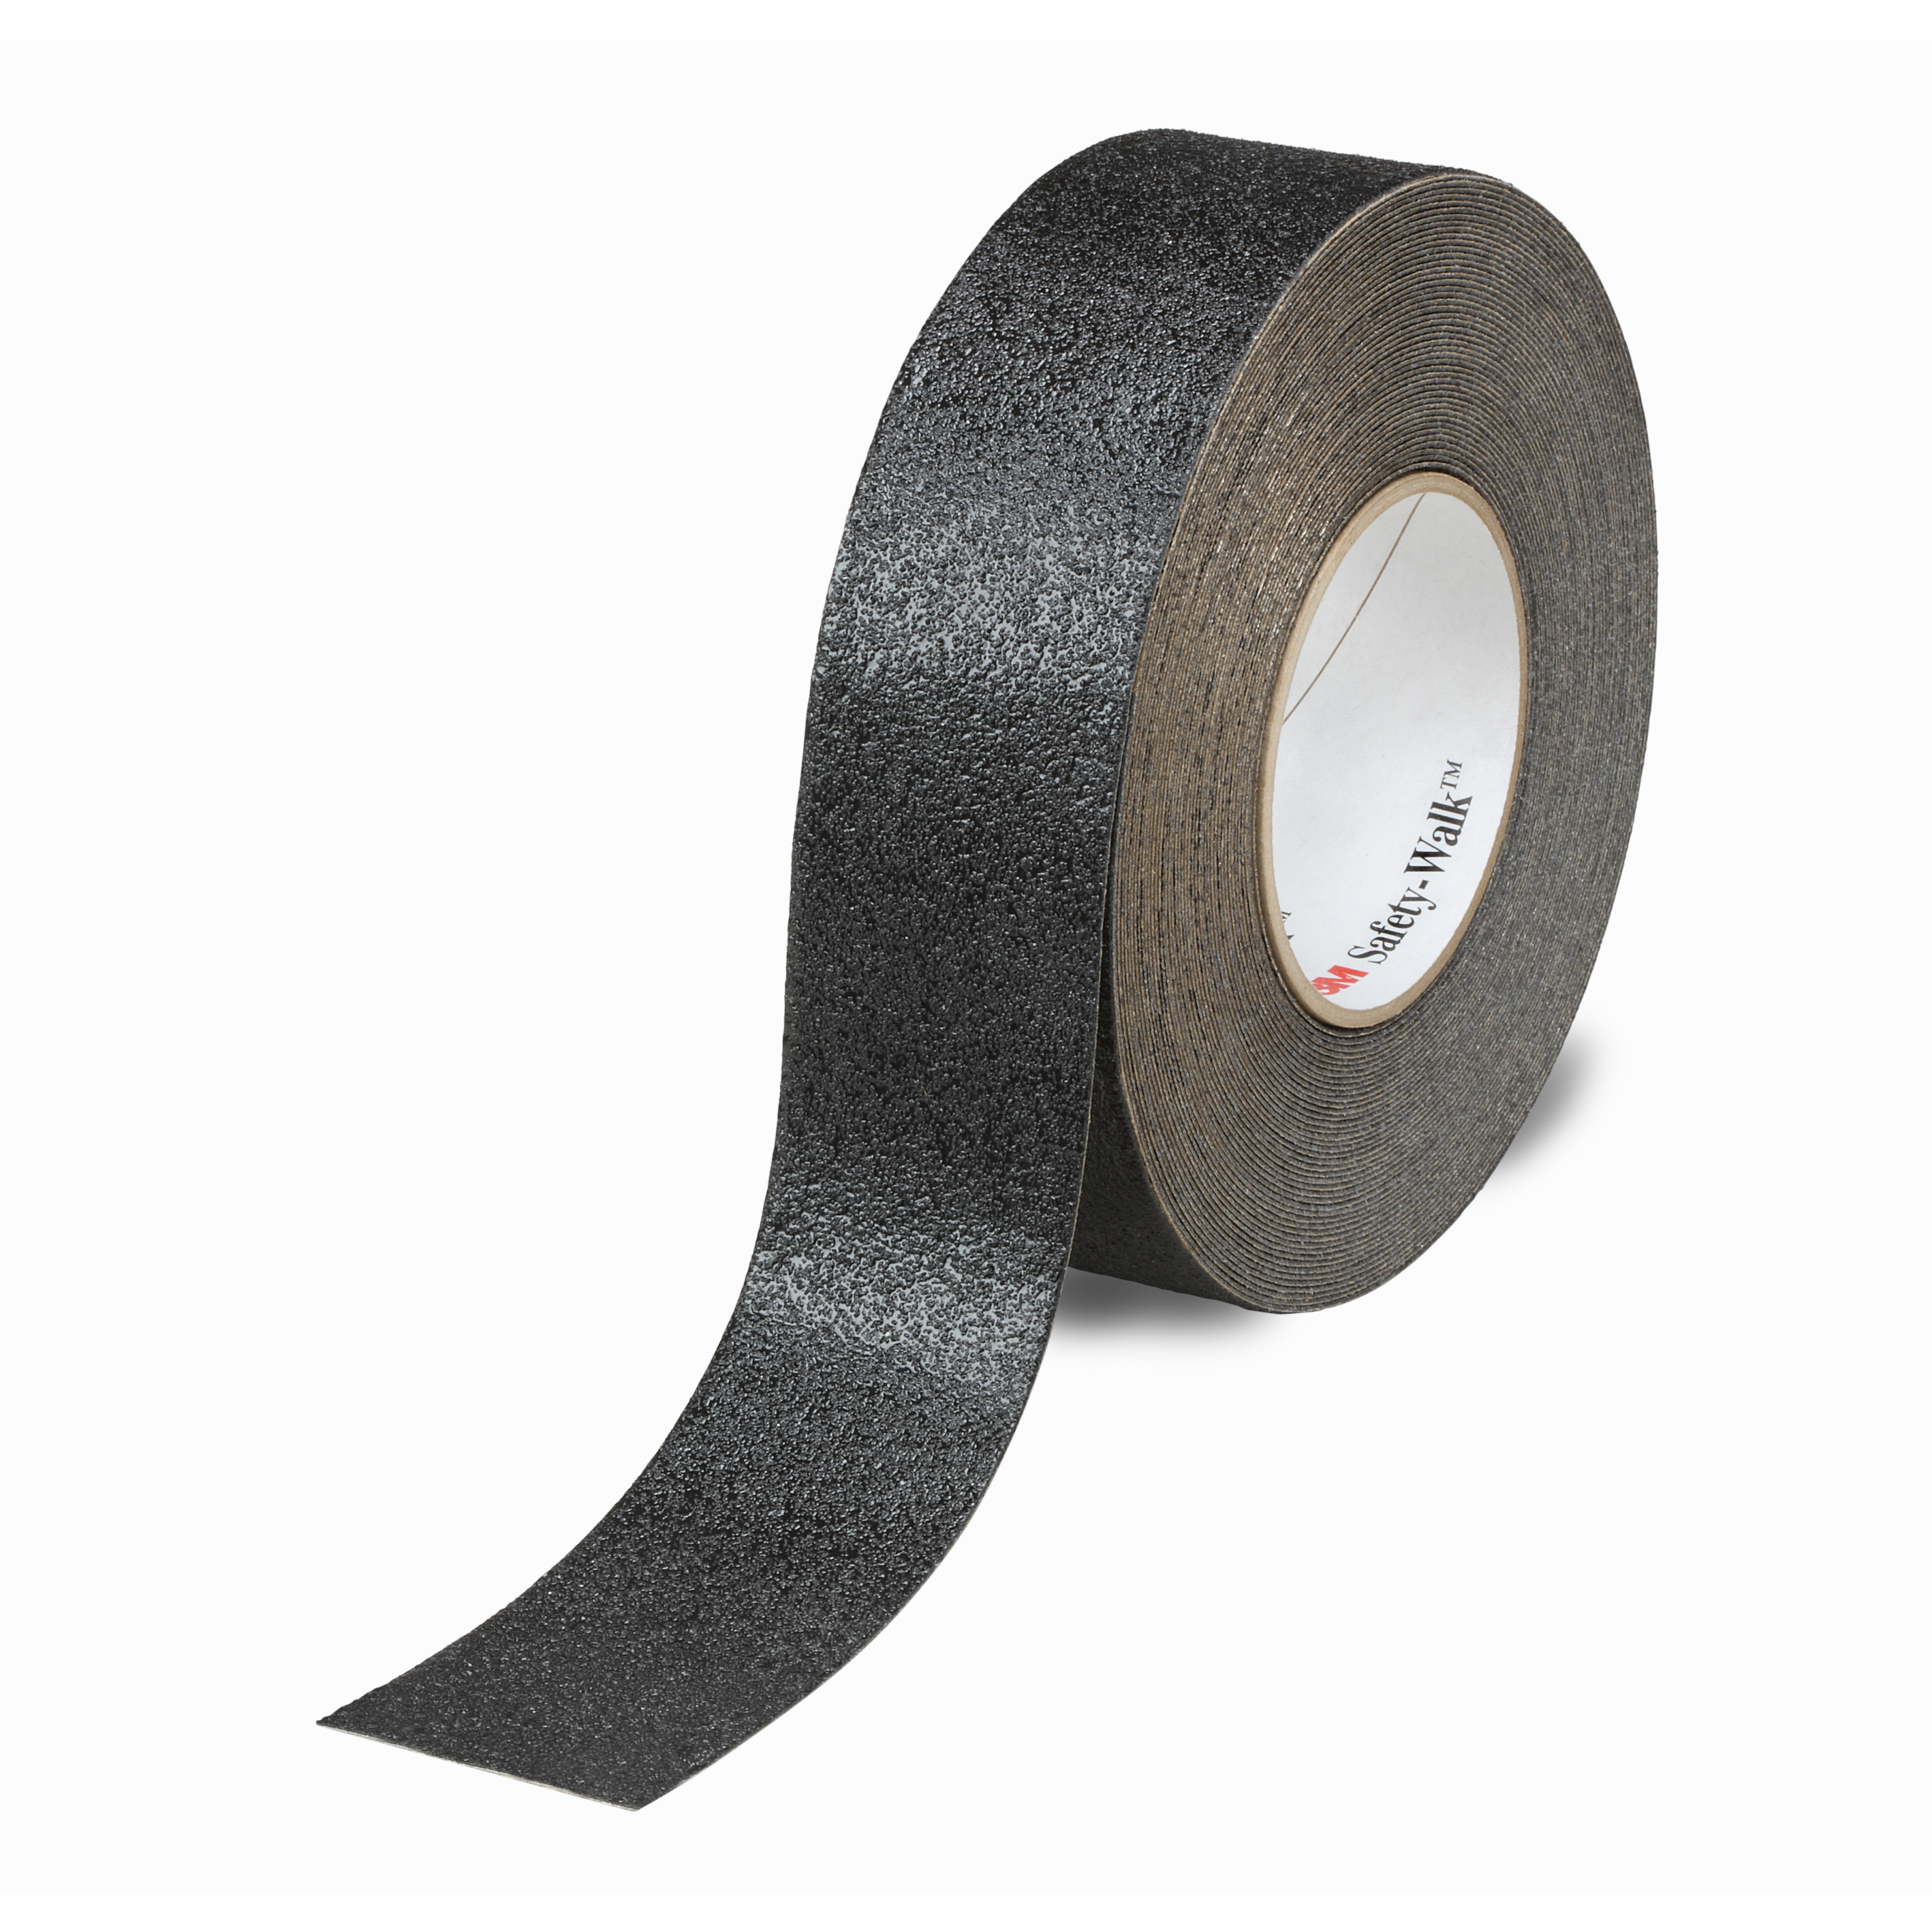 3M™ Safety-Walk™ Slip-Resistant Conformable Tapes & Treads 530, Safety
Yellow, 49.25 x 80 yd